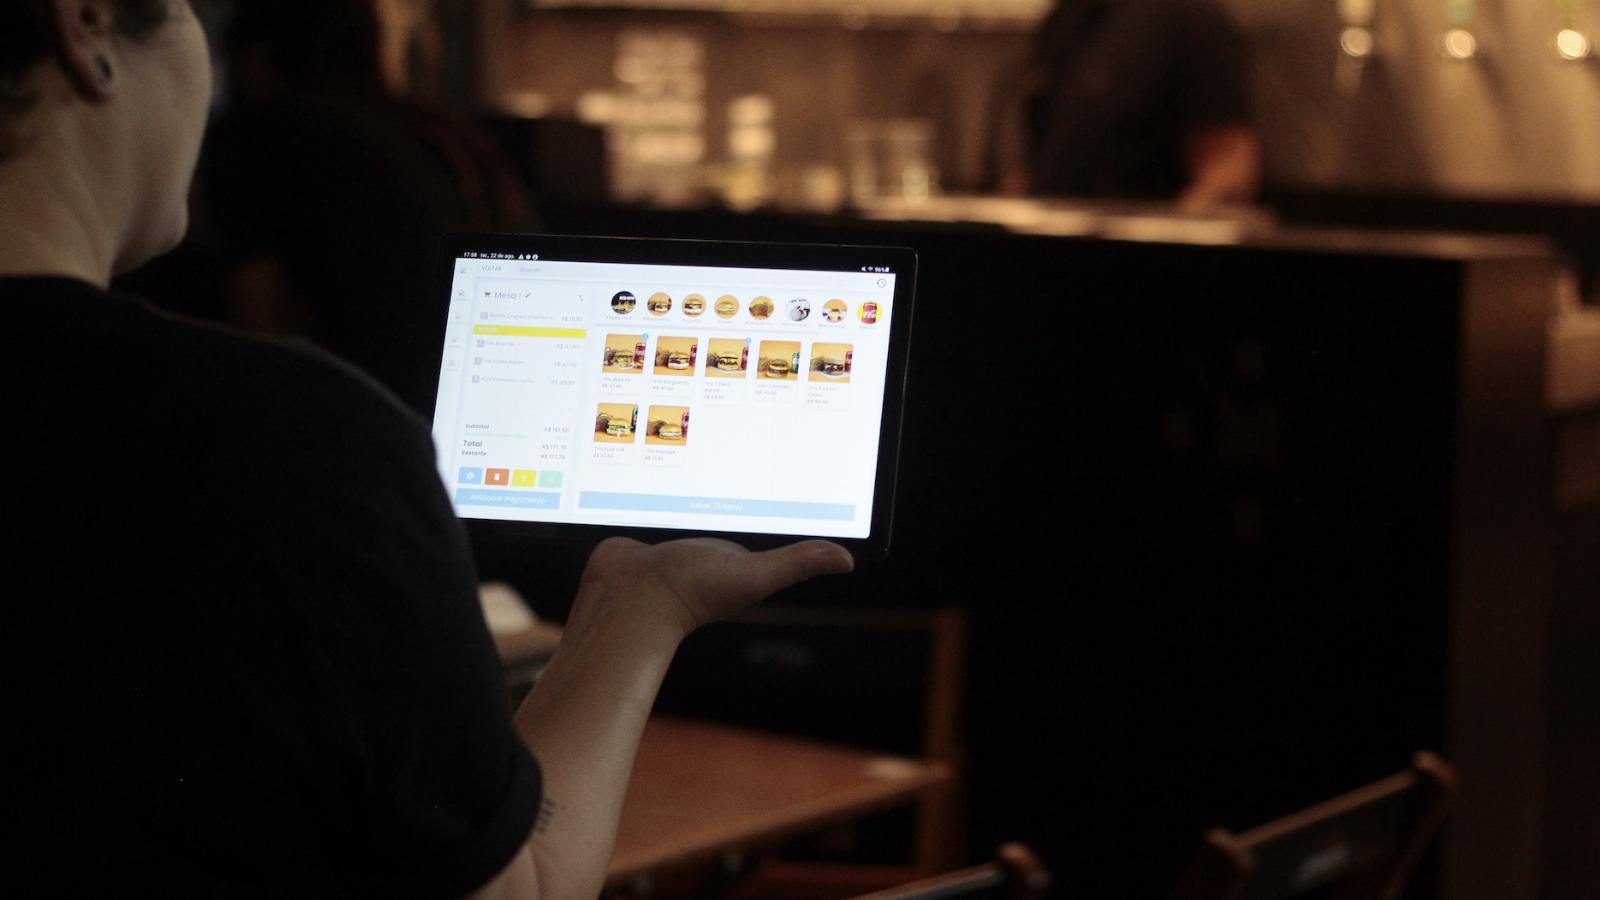 Yooga wants its restaurant operating system to be ‘Toast of Latin America’